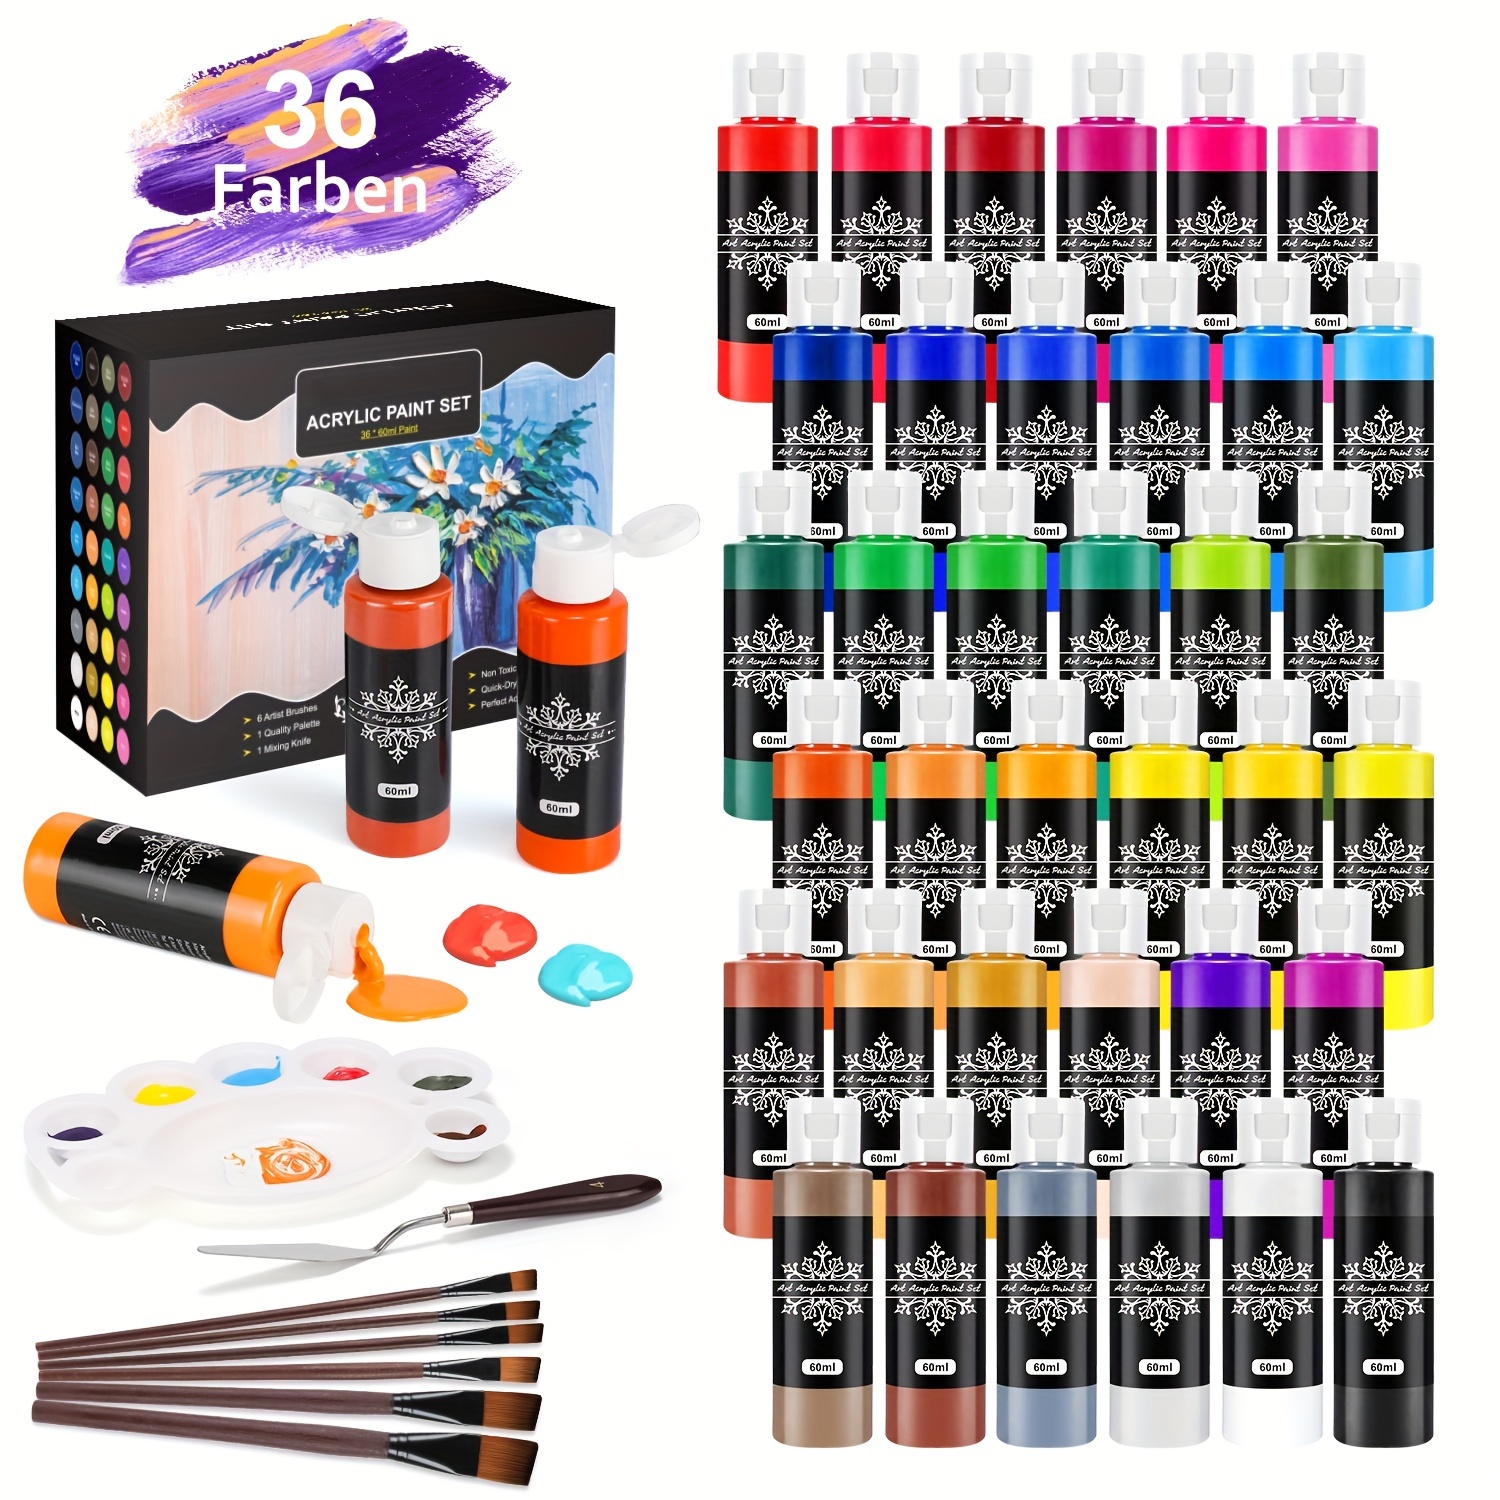 Shuttle Art Shuttle Art acrylic paints acrylic pigment 36 colors set  metallic color quick-drying waterproof durability 60ml palette brush with  cloth / glass / children's illustration Coloring craft handmade art painting  materials